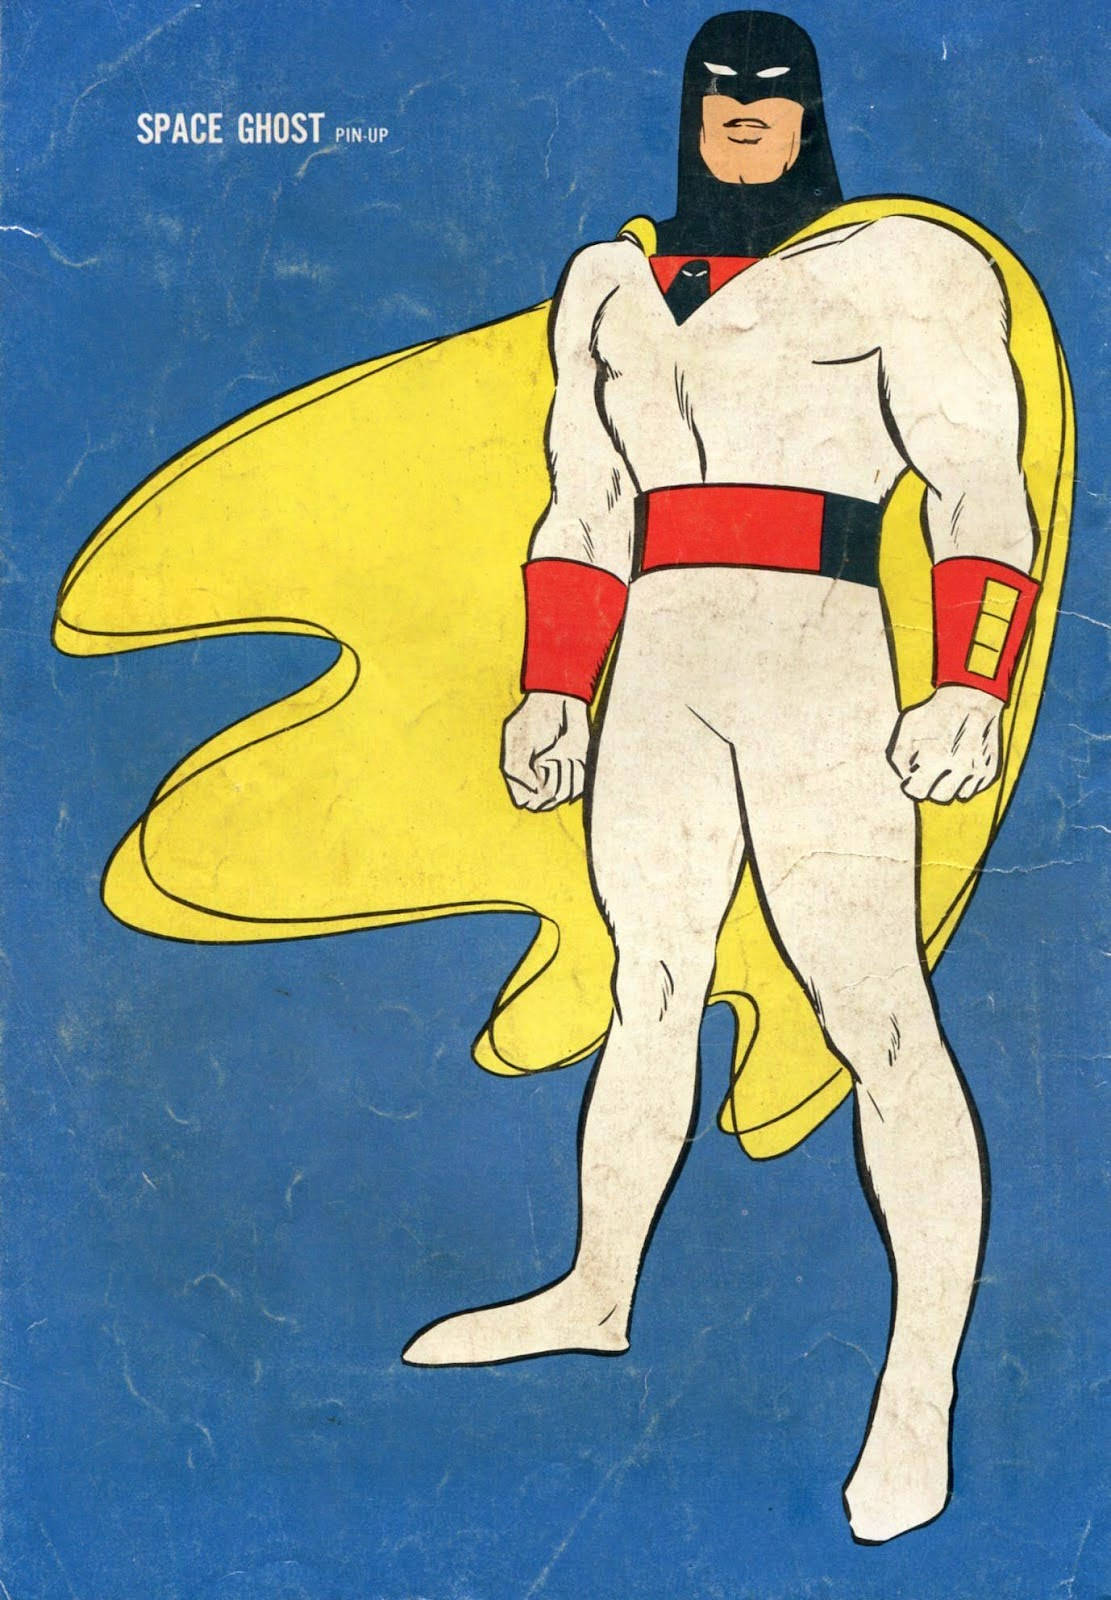 Space Ghost Pin-up Poster Wallpaper